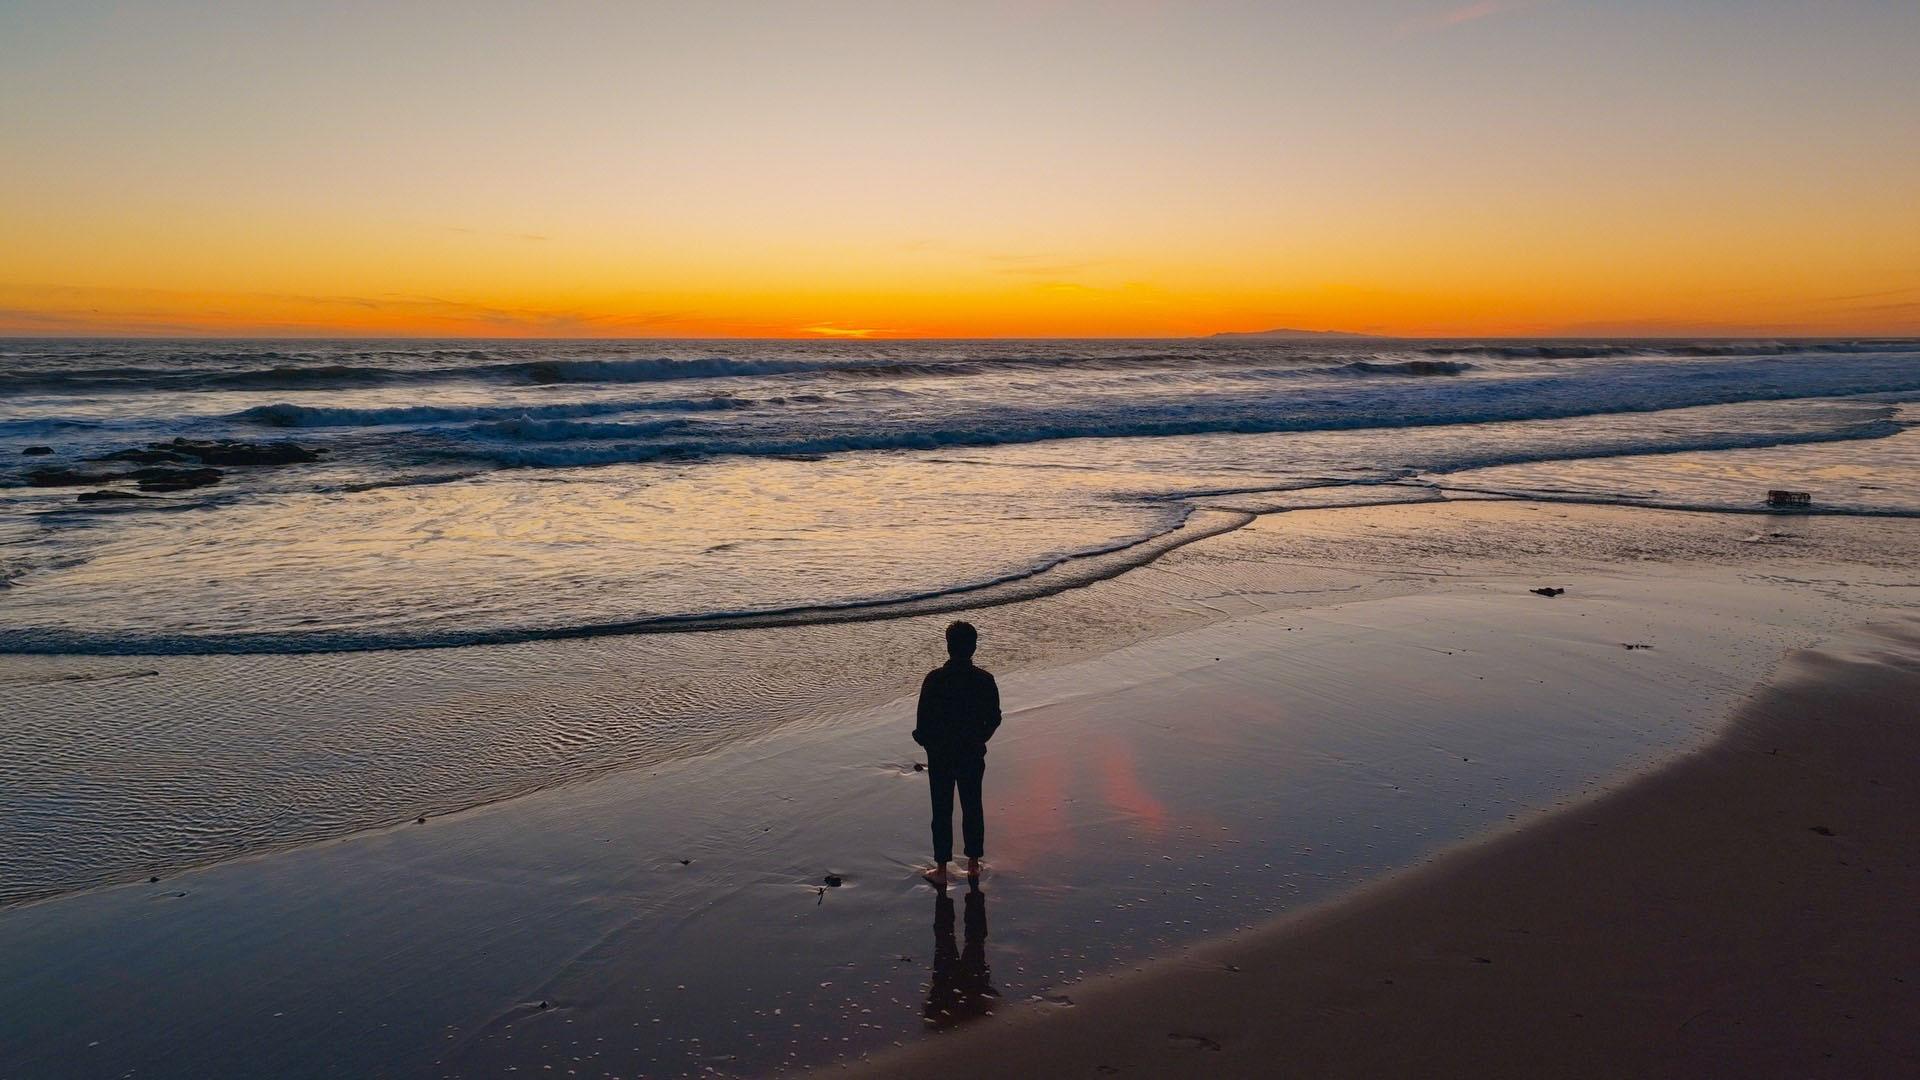 Silhouette of man statnding on shore looking out at sea and sunset